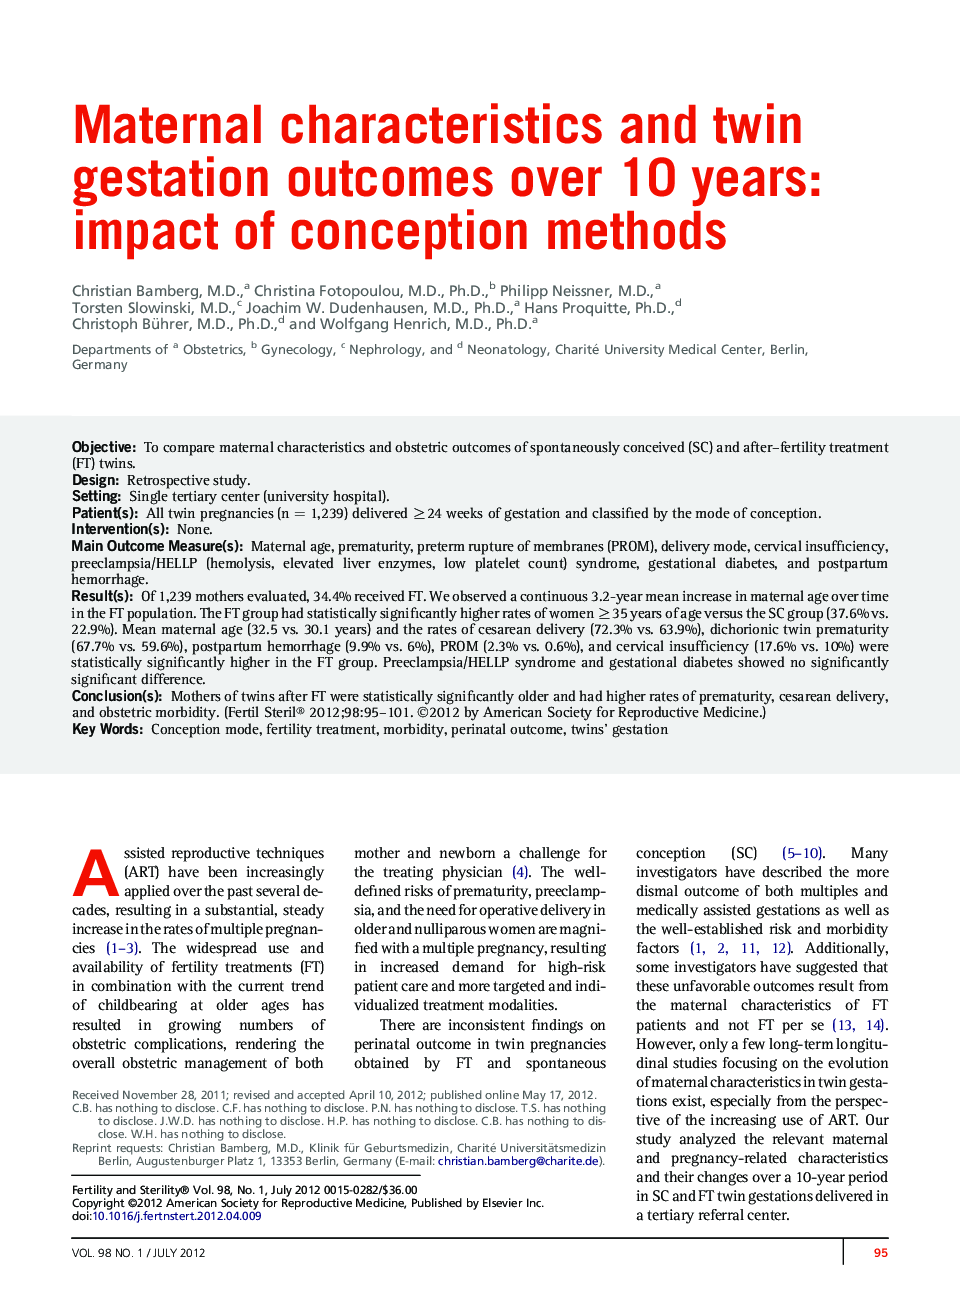 Maternal characteristics and twin gestation outcomes over 10 years: impact of conception methods